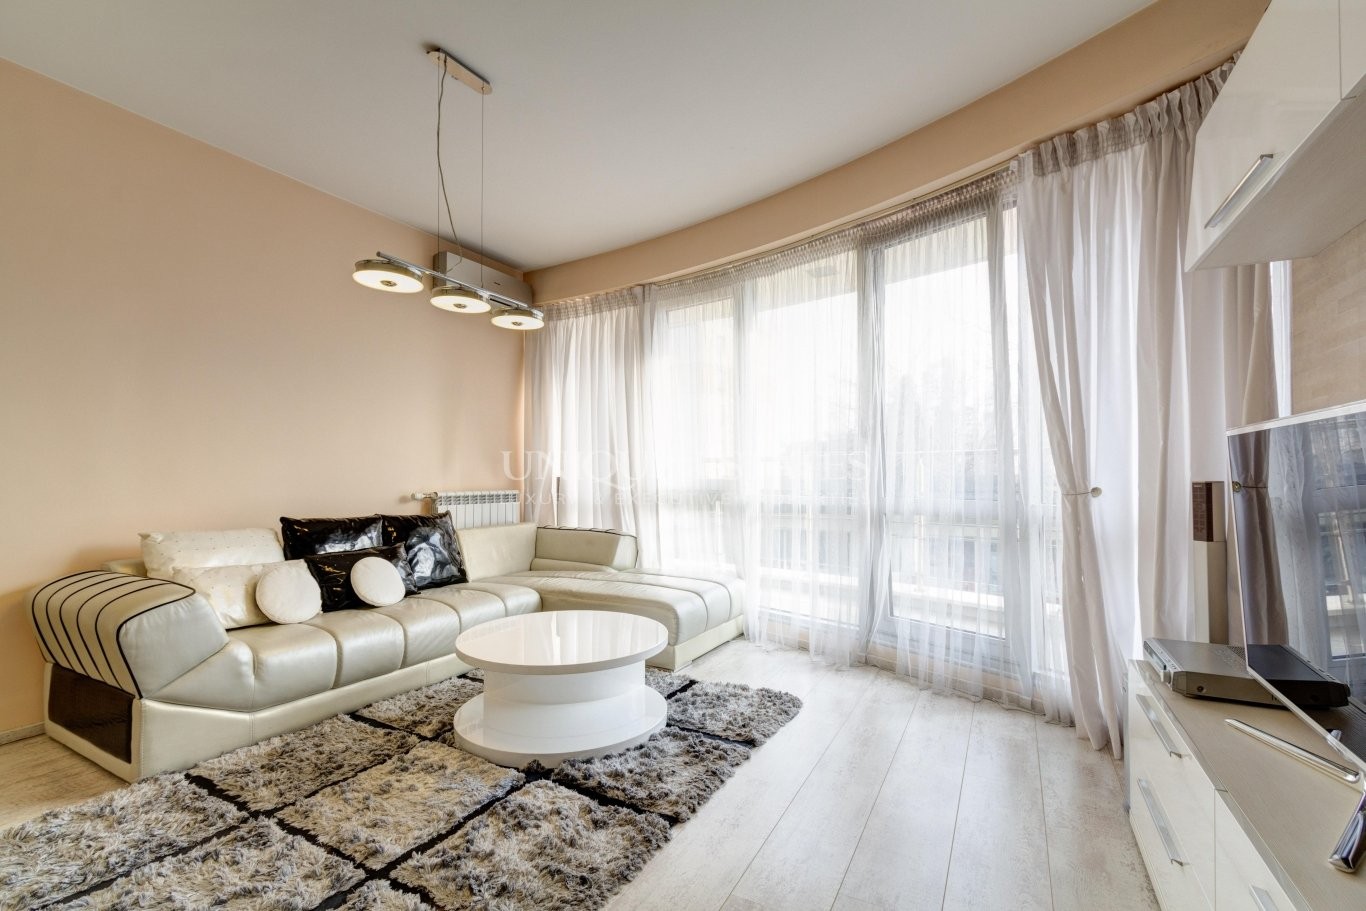 Apartment for sale in Sofia, Iztok with listing ID: K6162 - image 2